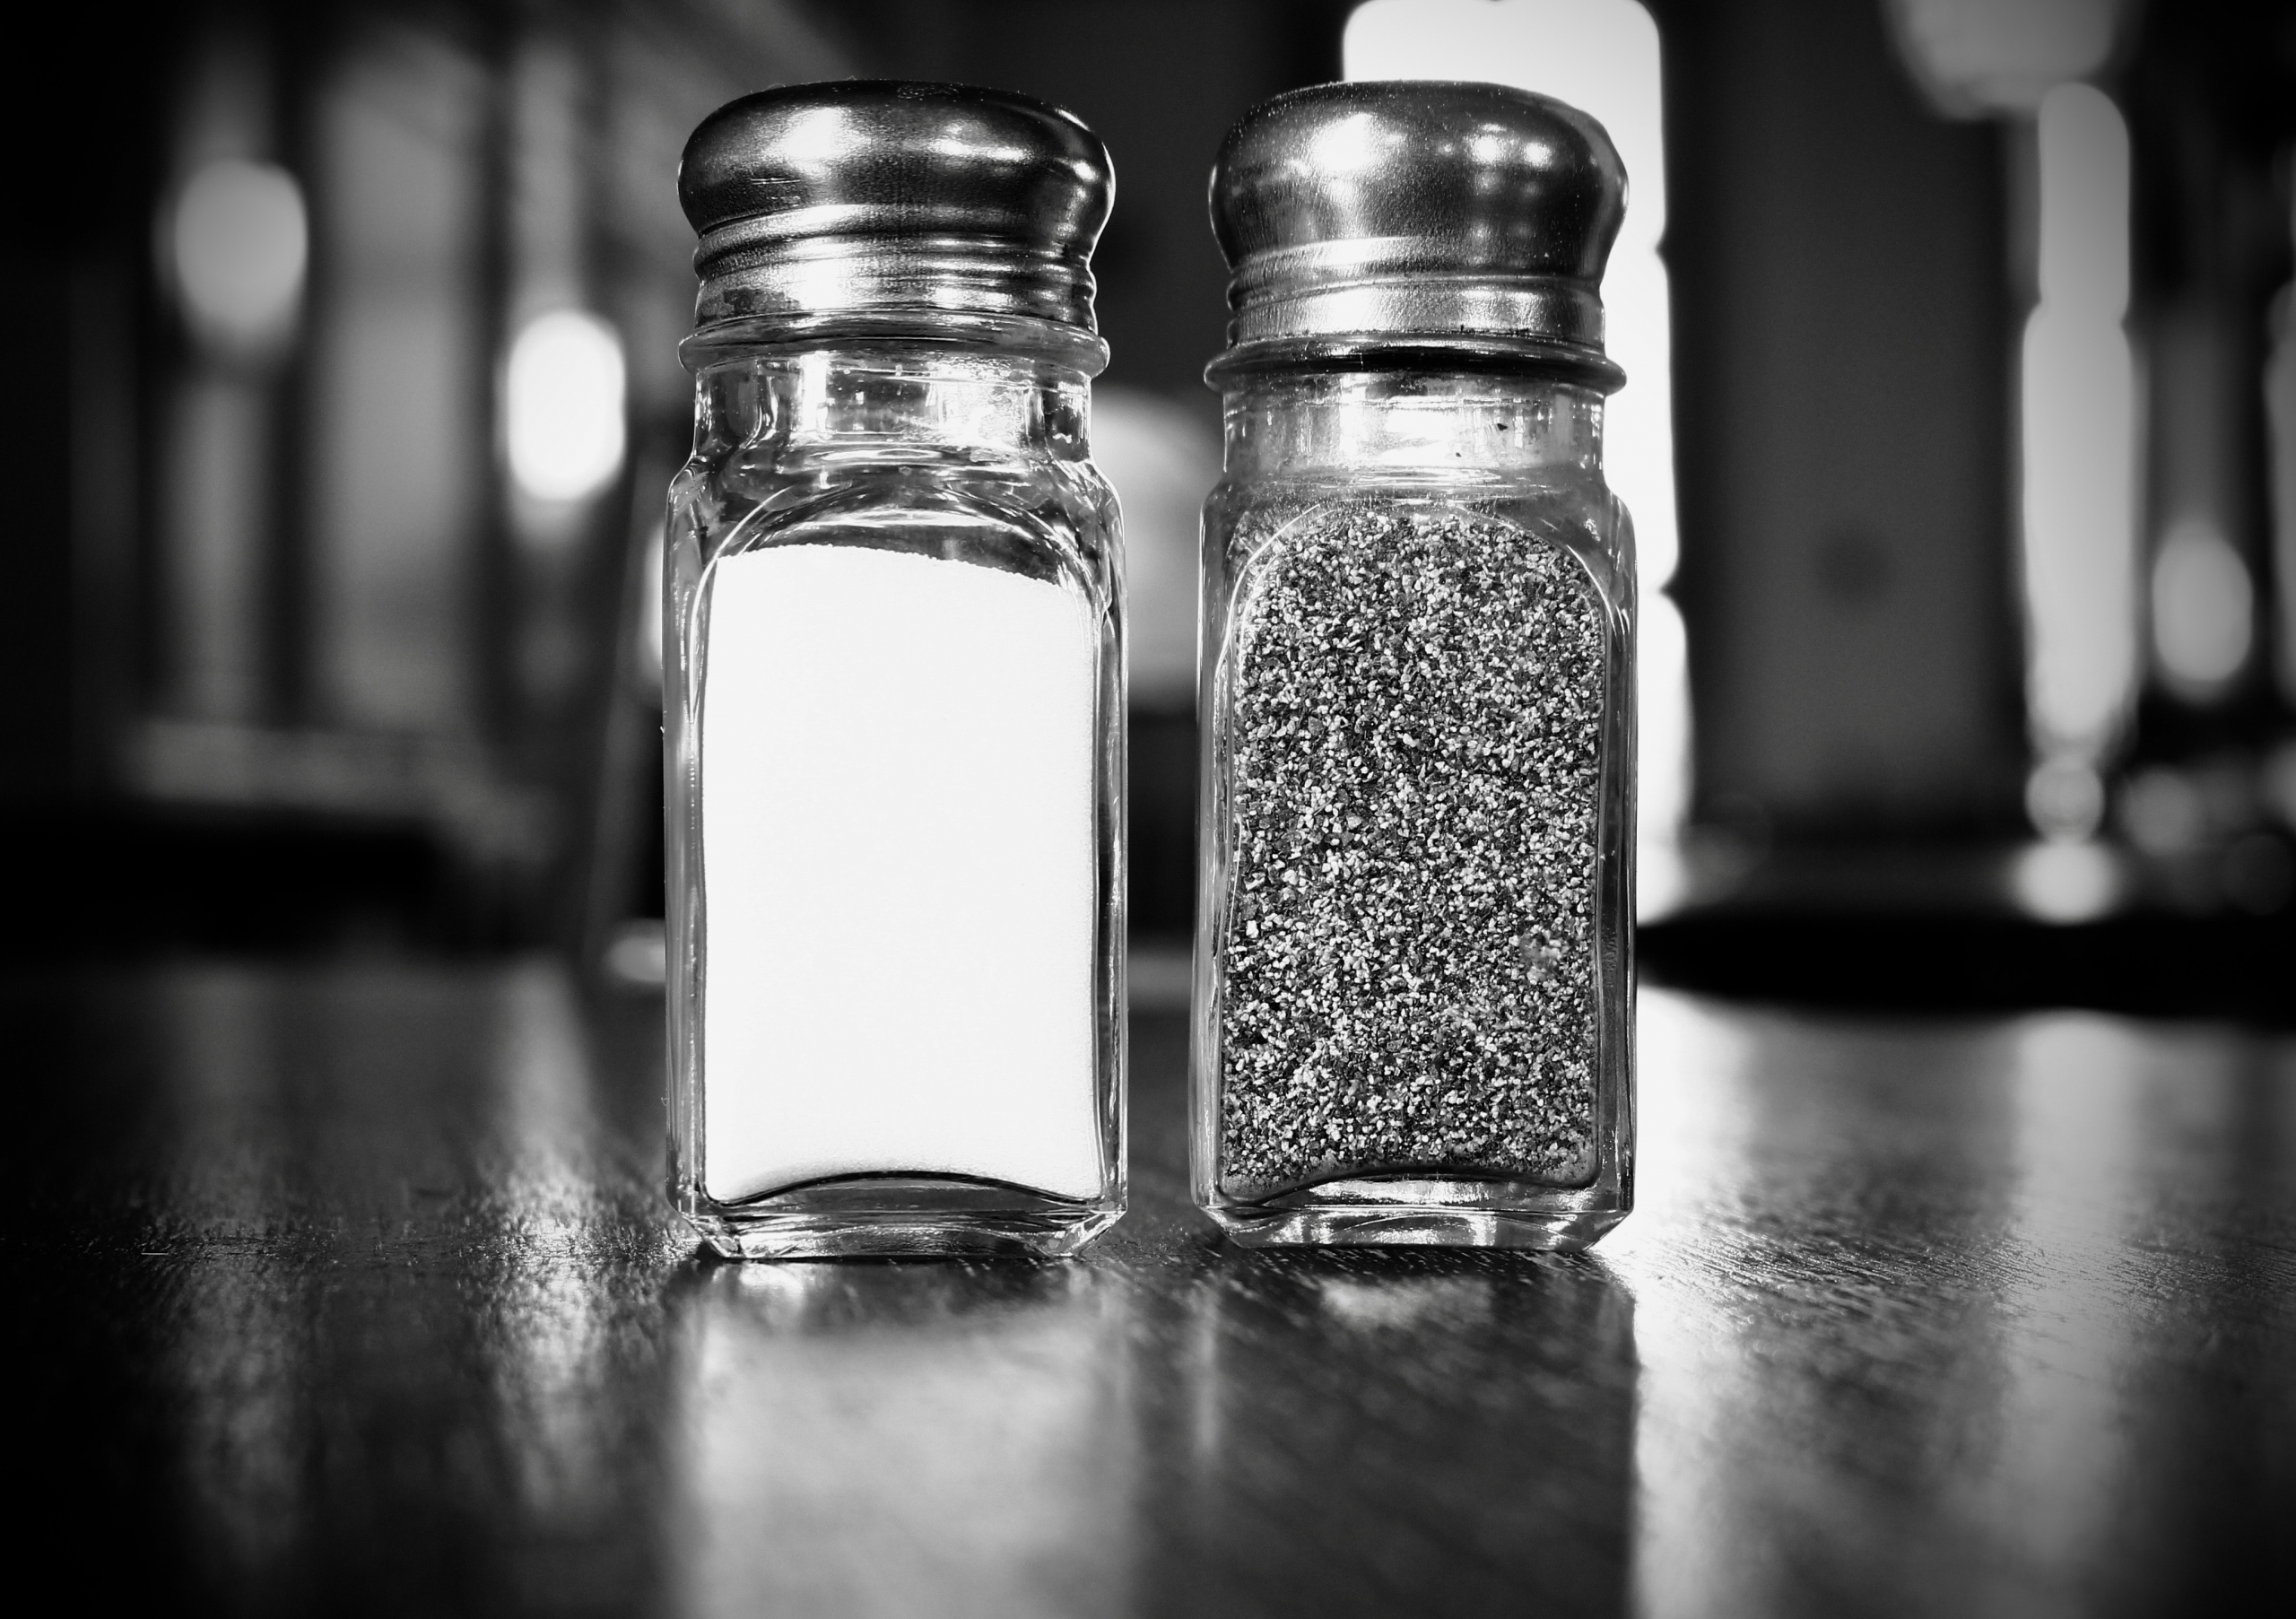 Salt and pepper shakers.